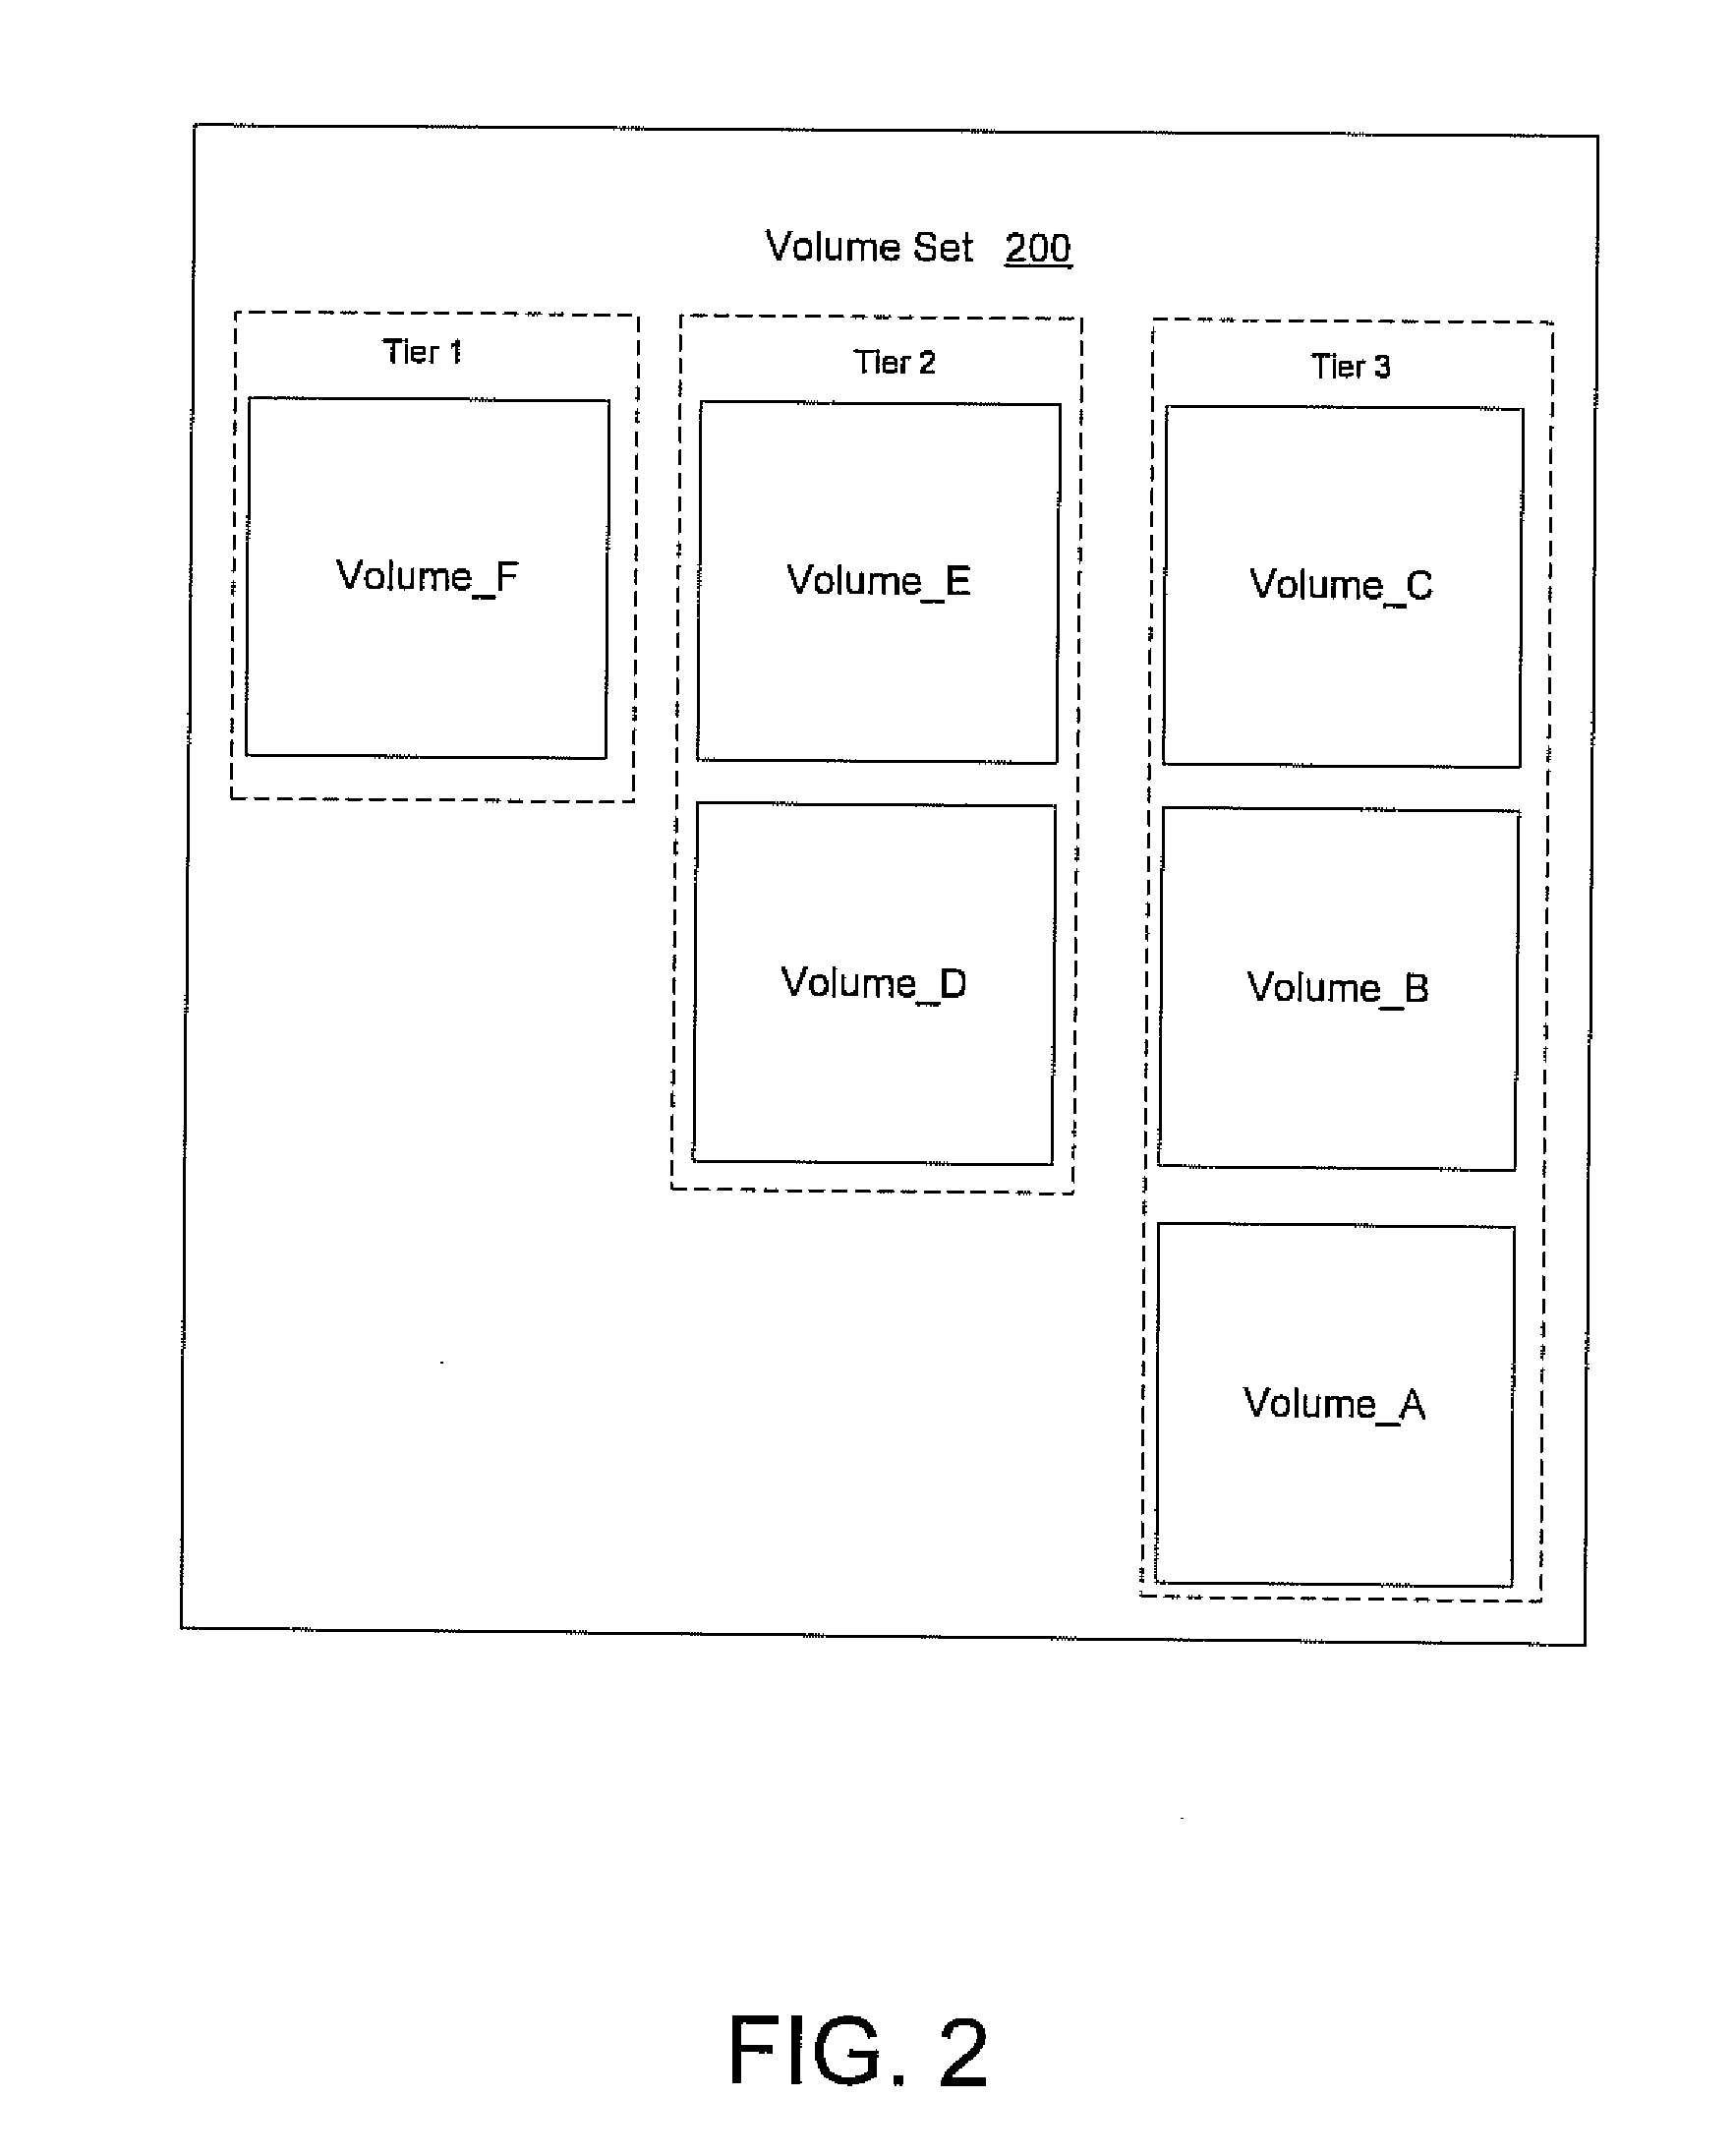 Using a per file activity ratio to optimally relocate data between volumes